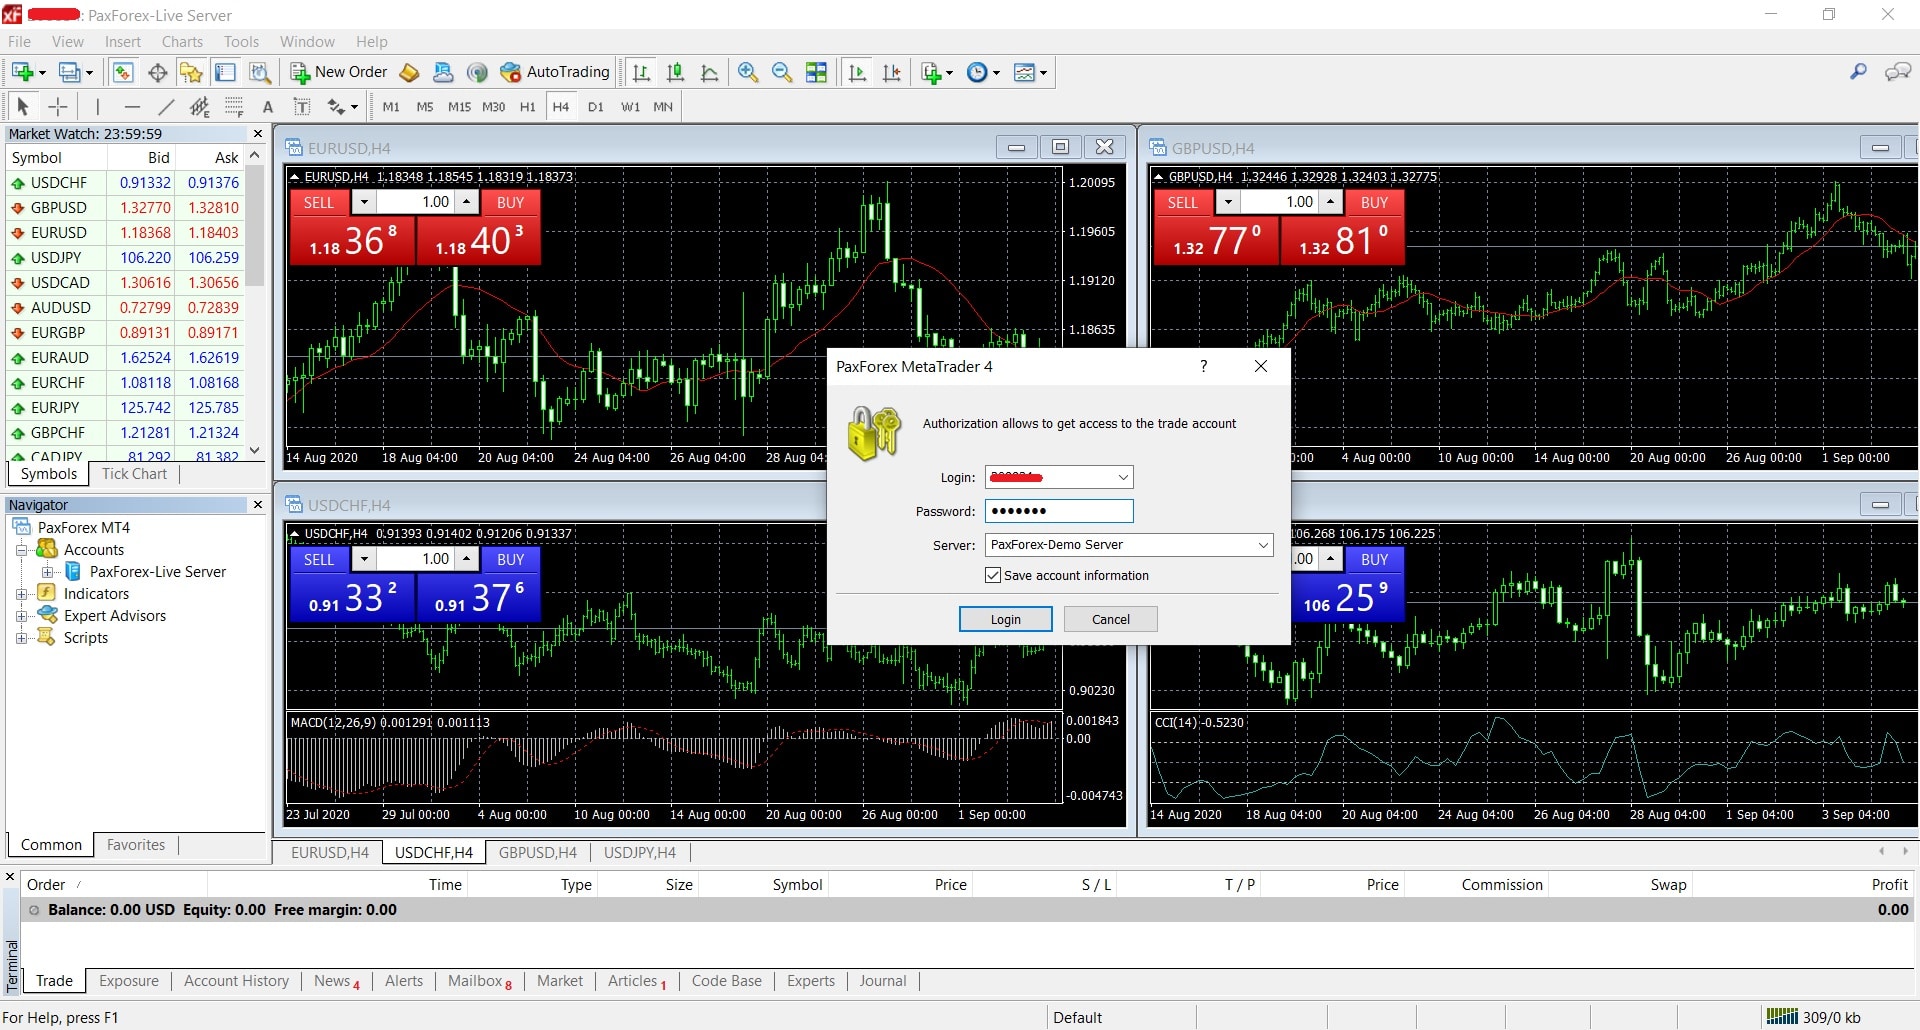 Accessing the PaxForex demo trading account